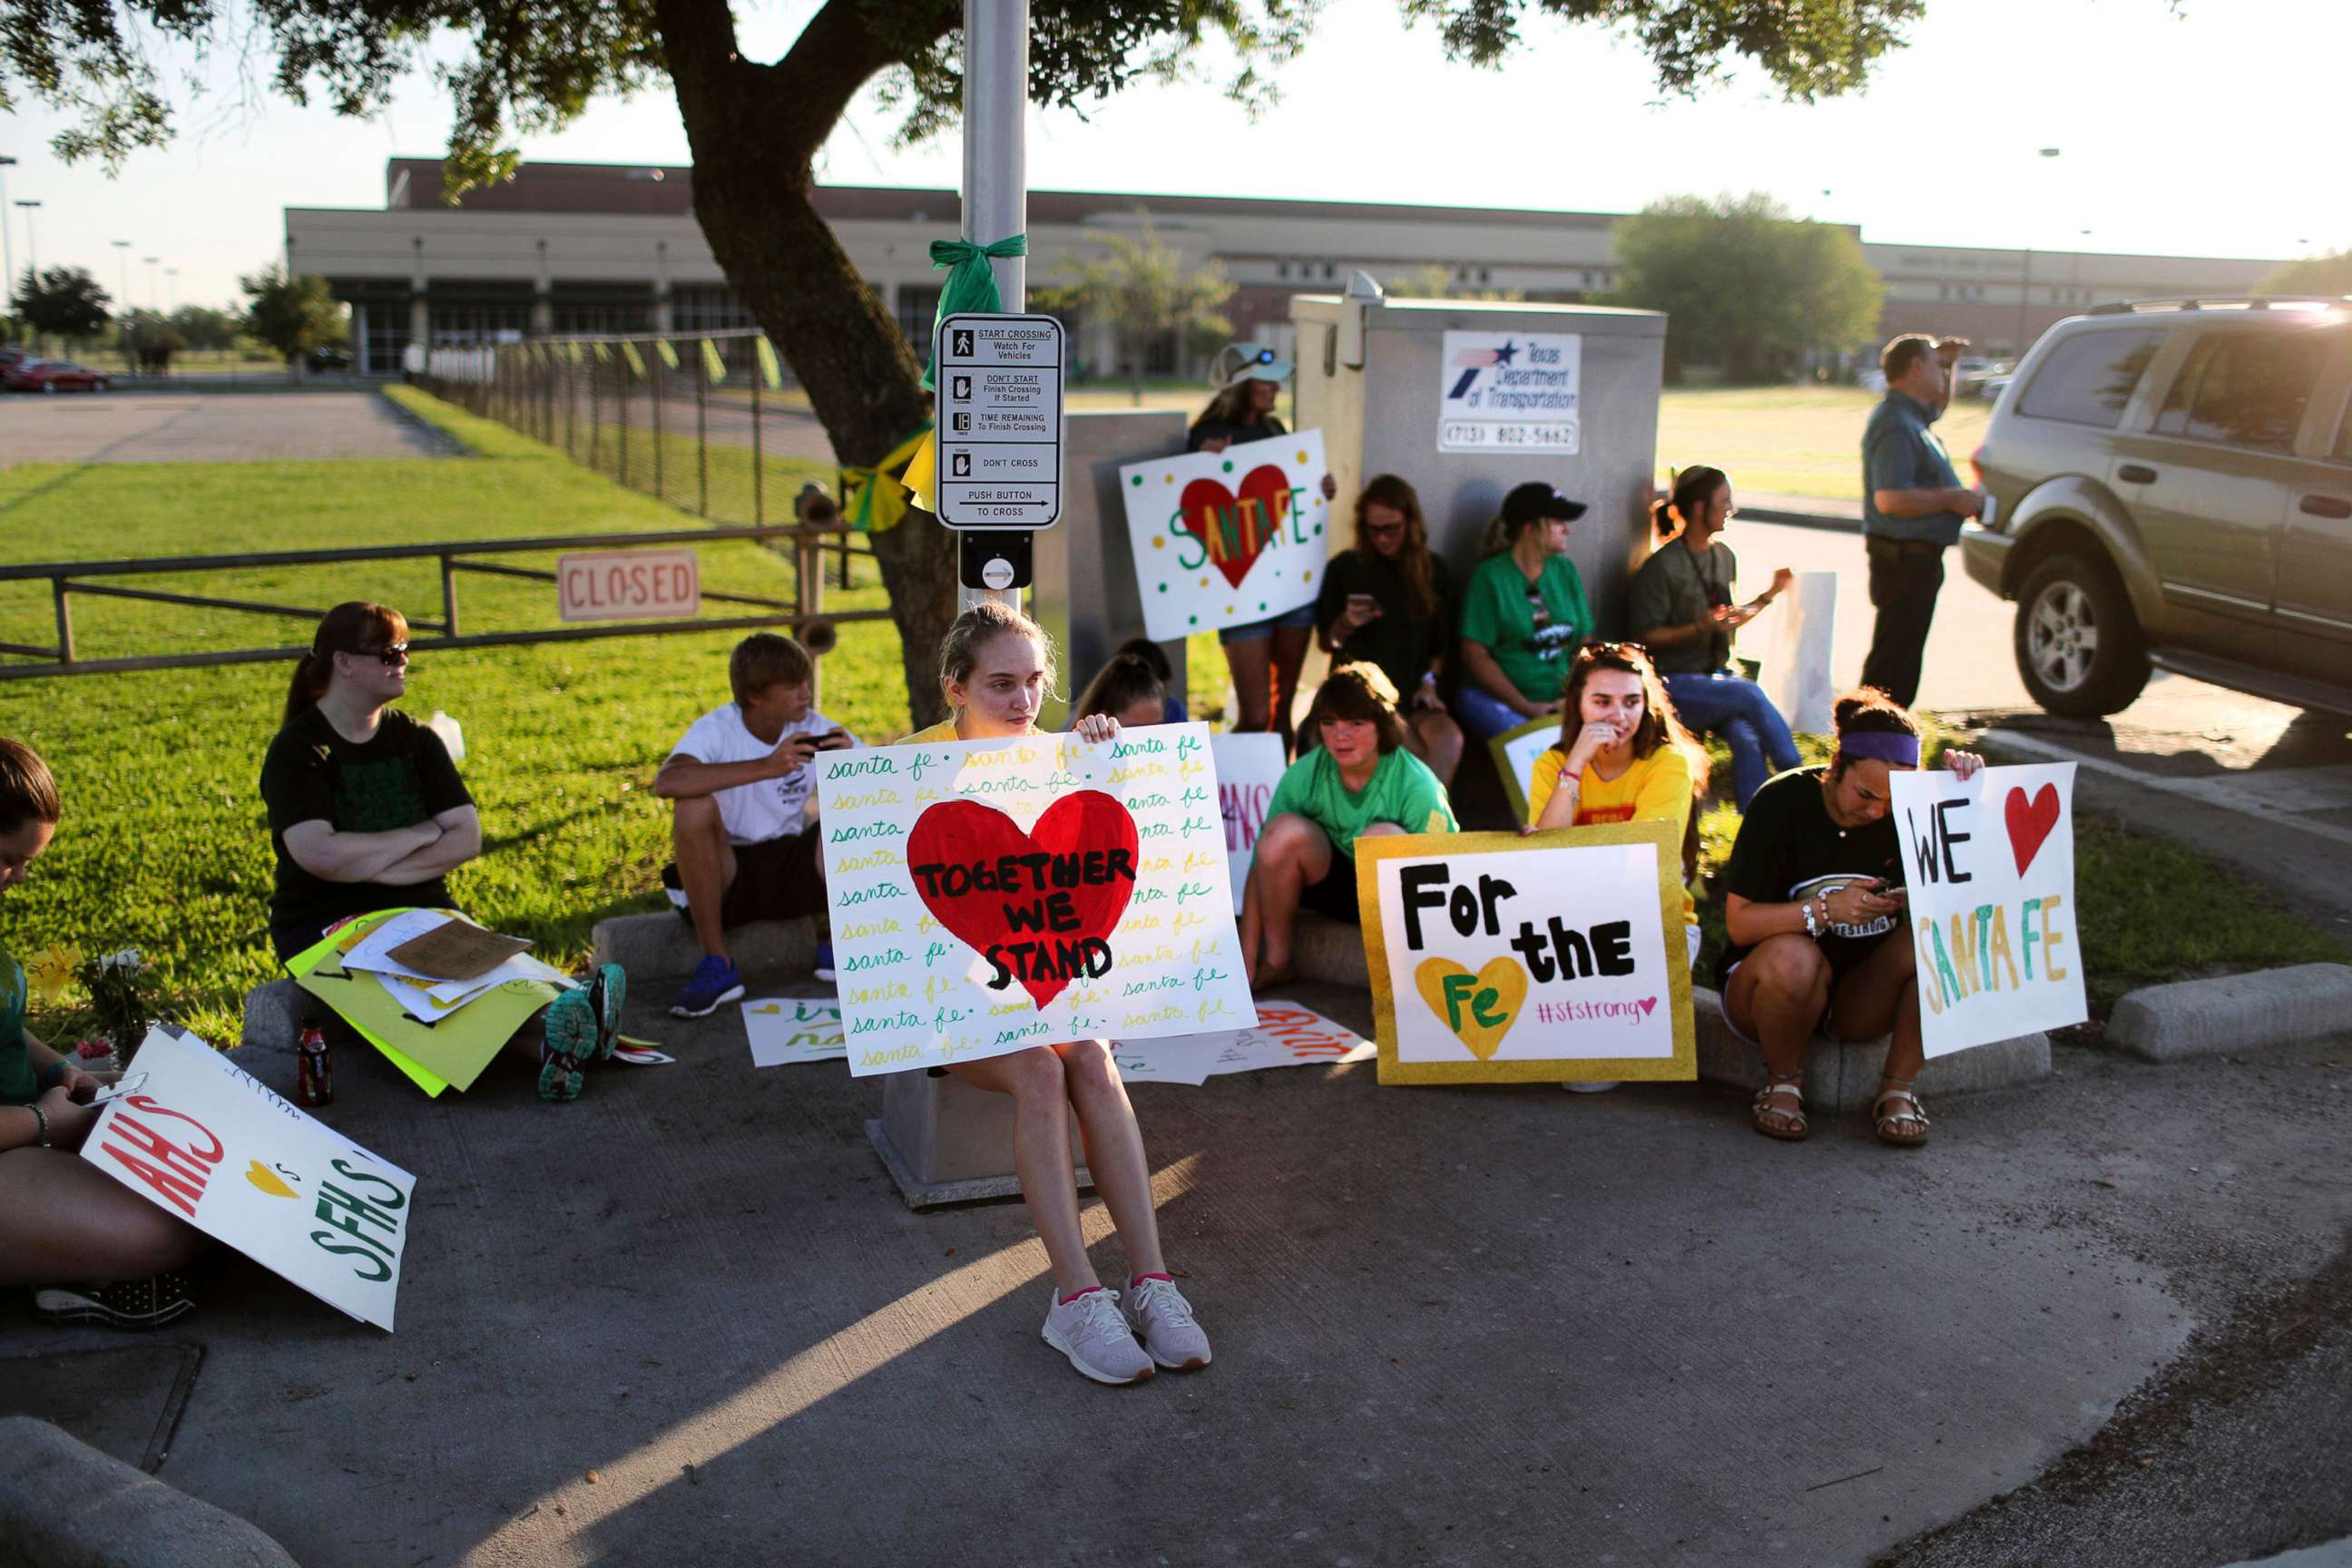 PHOTO: Santa Fe High School supporters gather by the school to wish student and staff well on their first day of classes, May 29, 2018 after a shooting that killed 10 people, in Santa Fe, Texas.